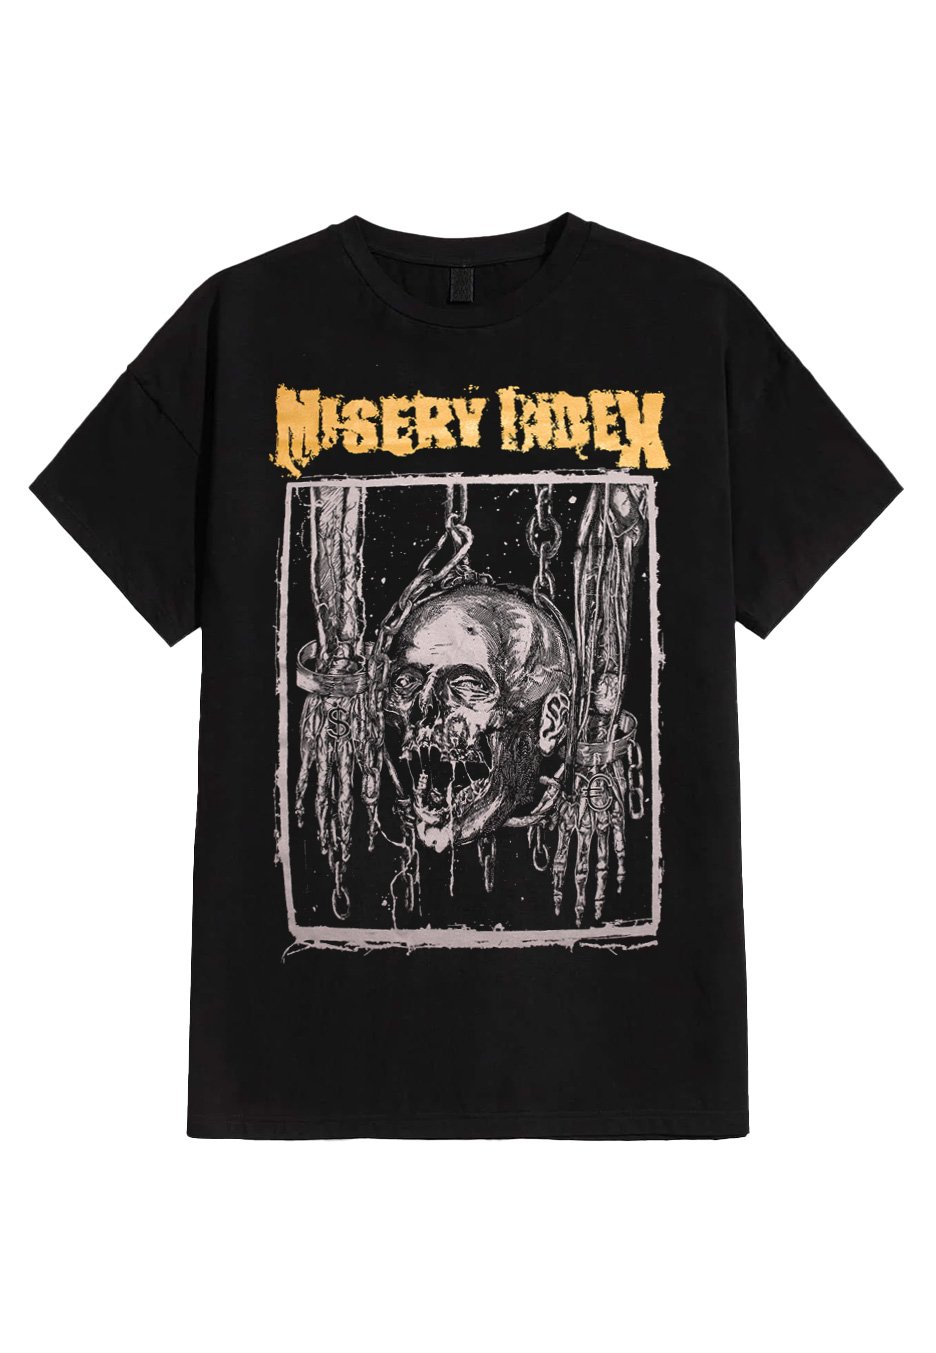 Misery Index - Rites Of Cruelty - T-Shirt